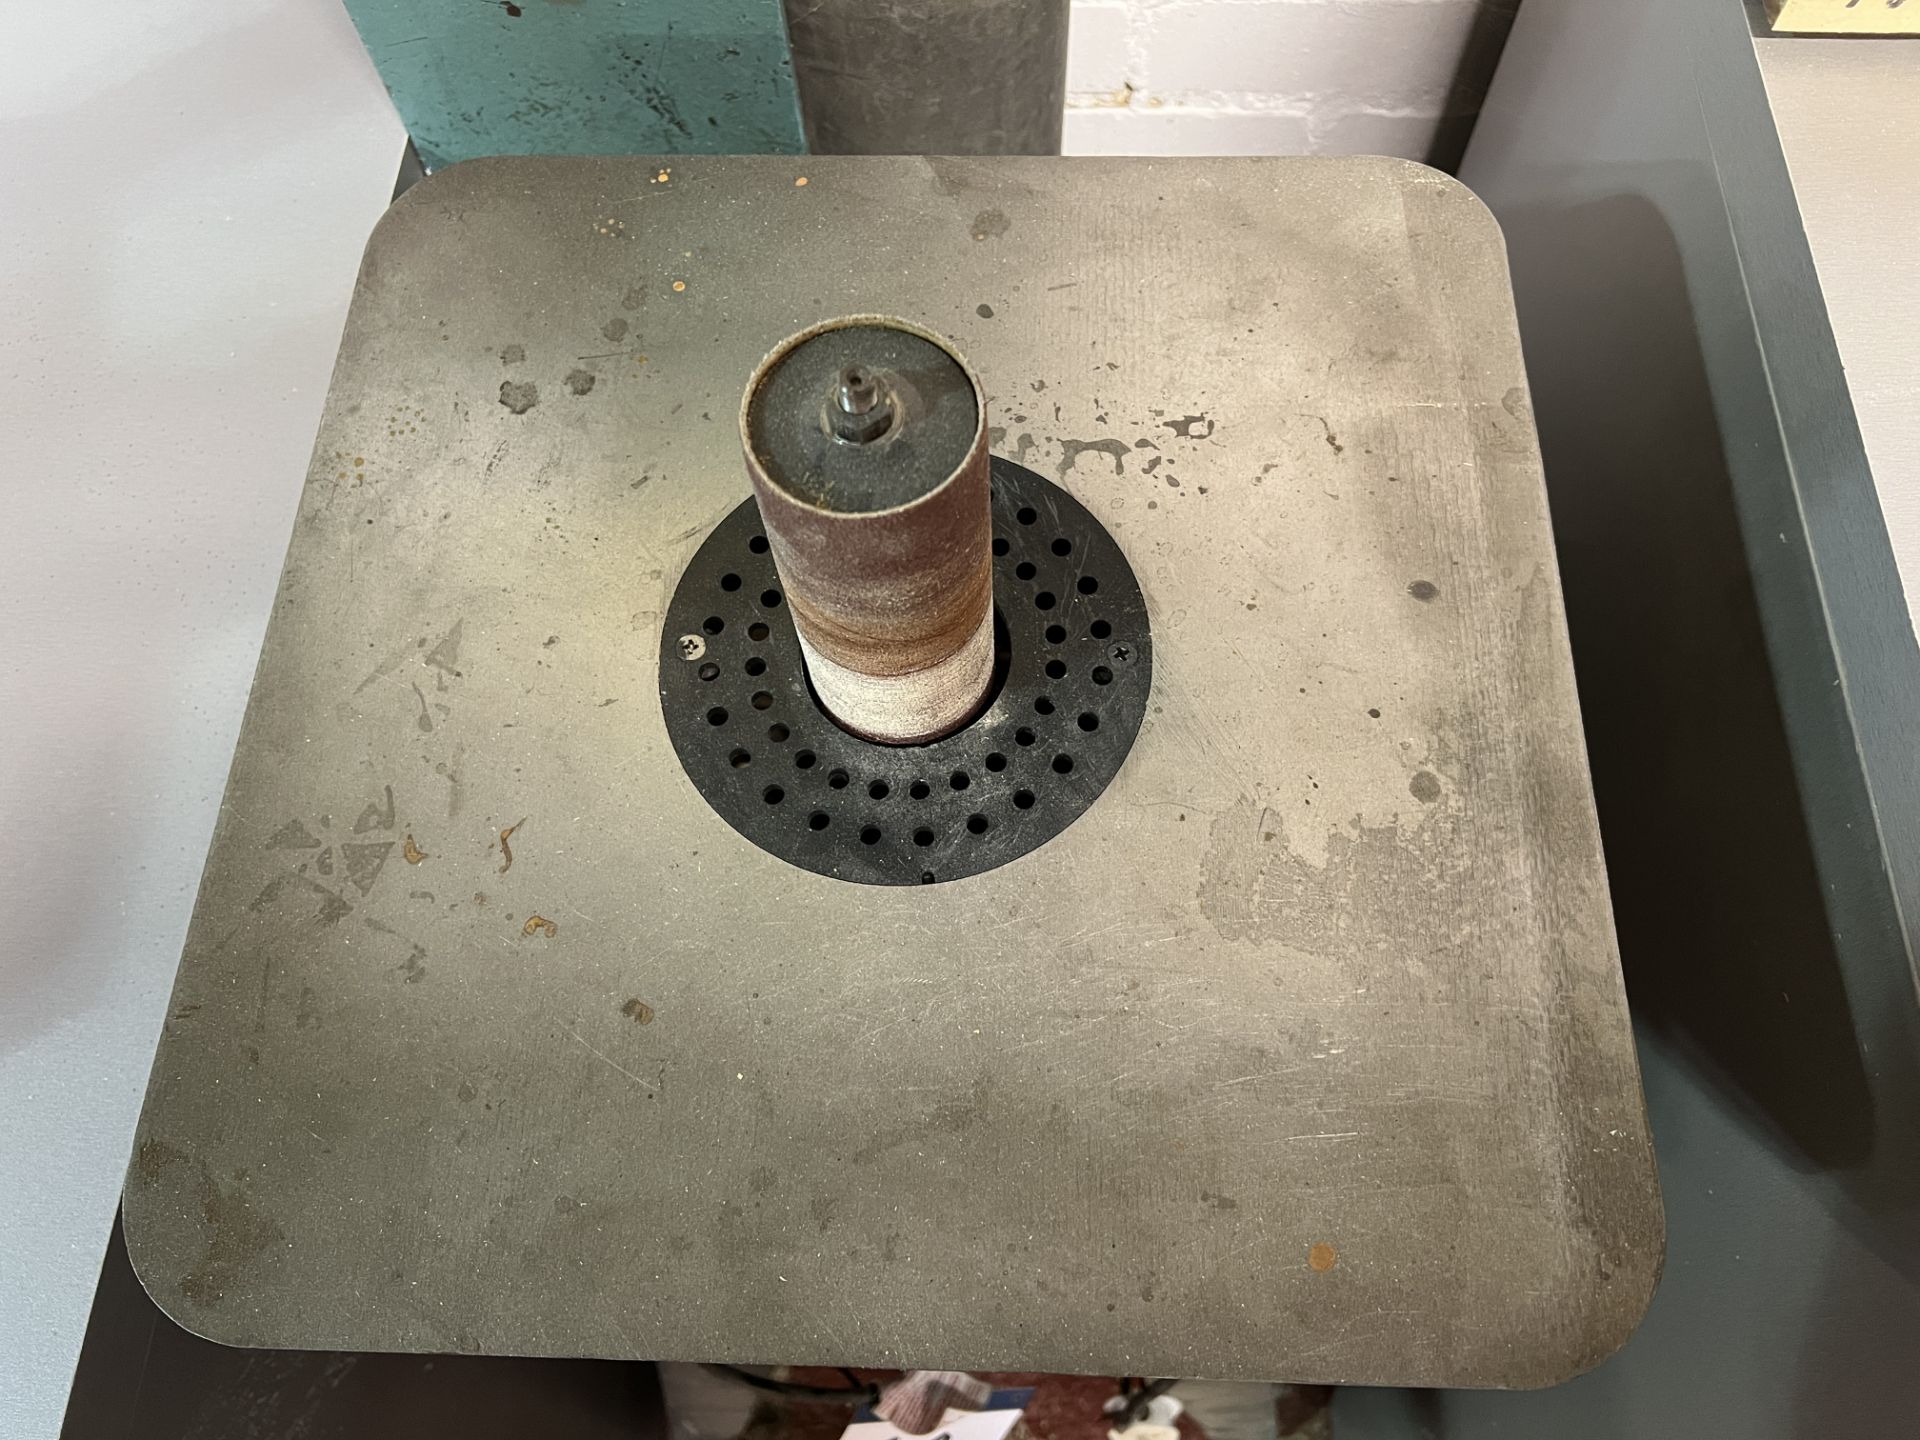 Clarke VRS1 pedestal rotary grit sander, maximum spindle speed 1400 r.p.m, 230 volts, location Manor - Image 2 of 5